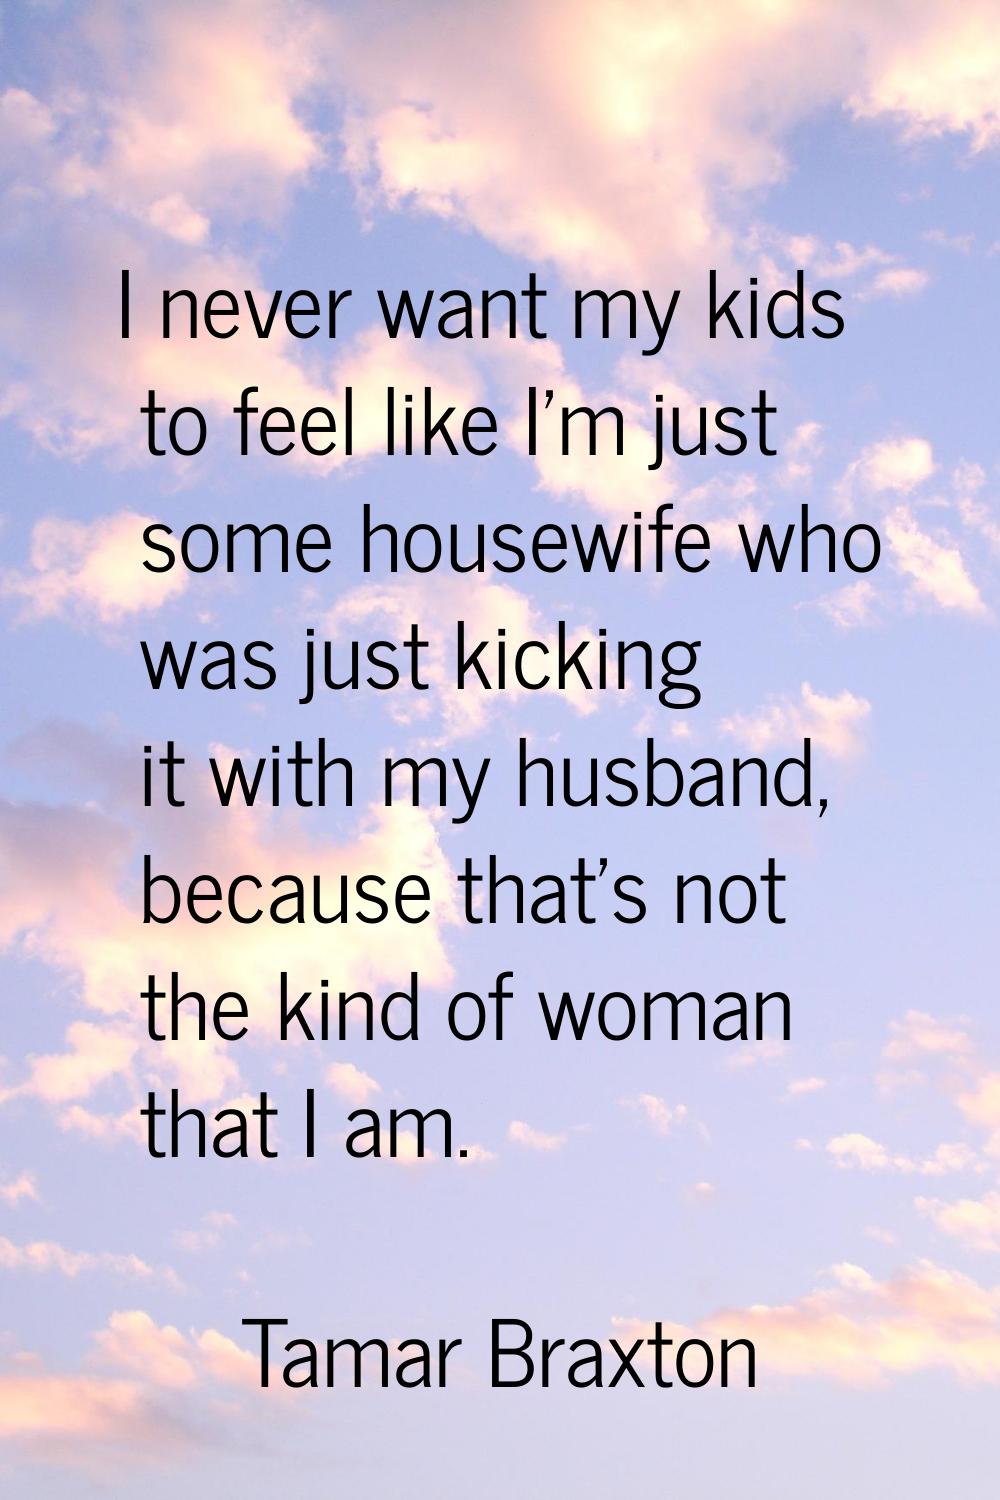 I never want my kids to feel like I'm just some housewife who was just kicking it with my husband, 